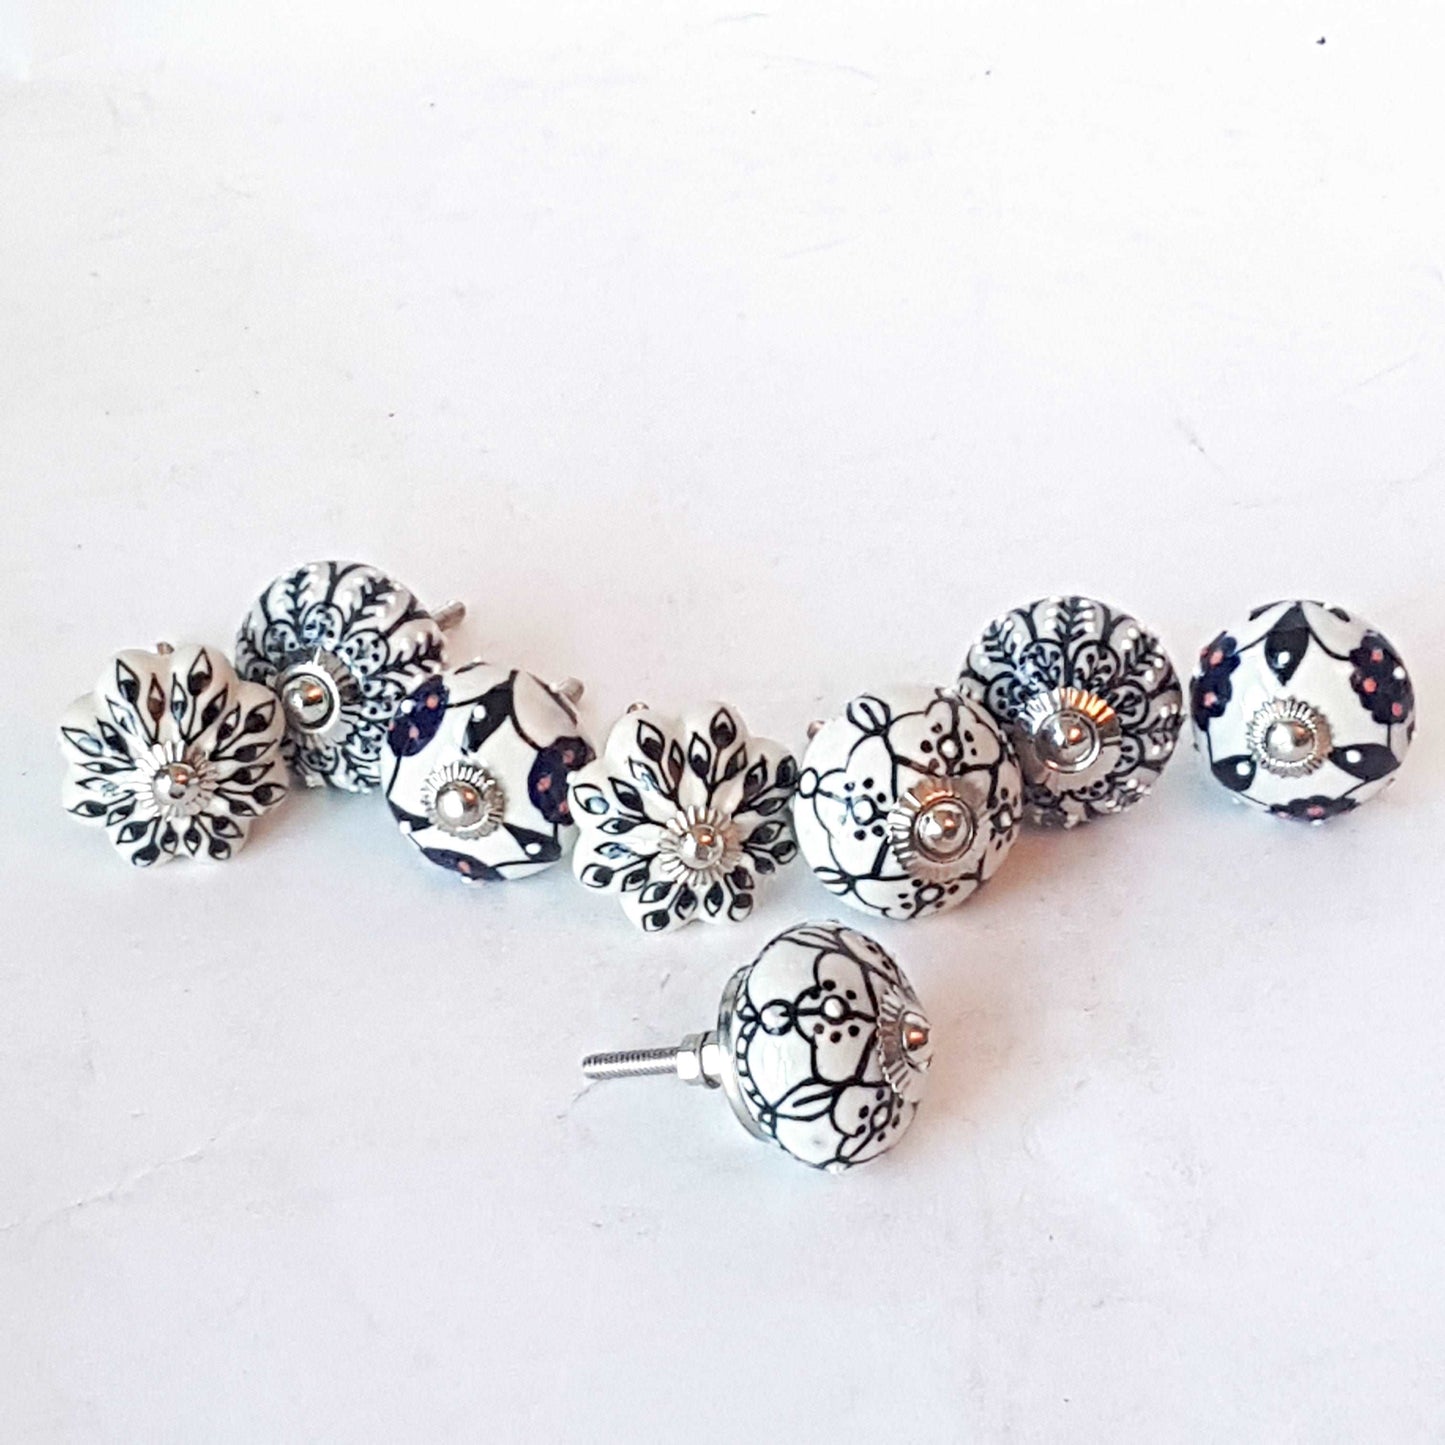 Andromeda set of 8 hand painted cabinet drawer knobs with botanical patterns in black & white.  Exclusive designer collection. In stock now!